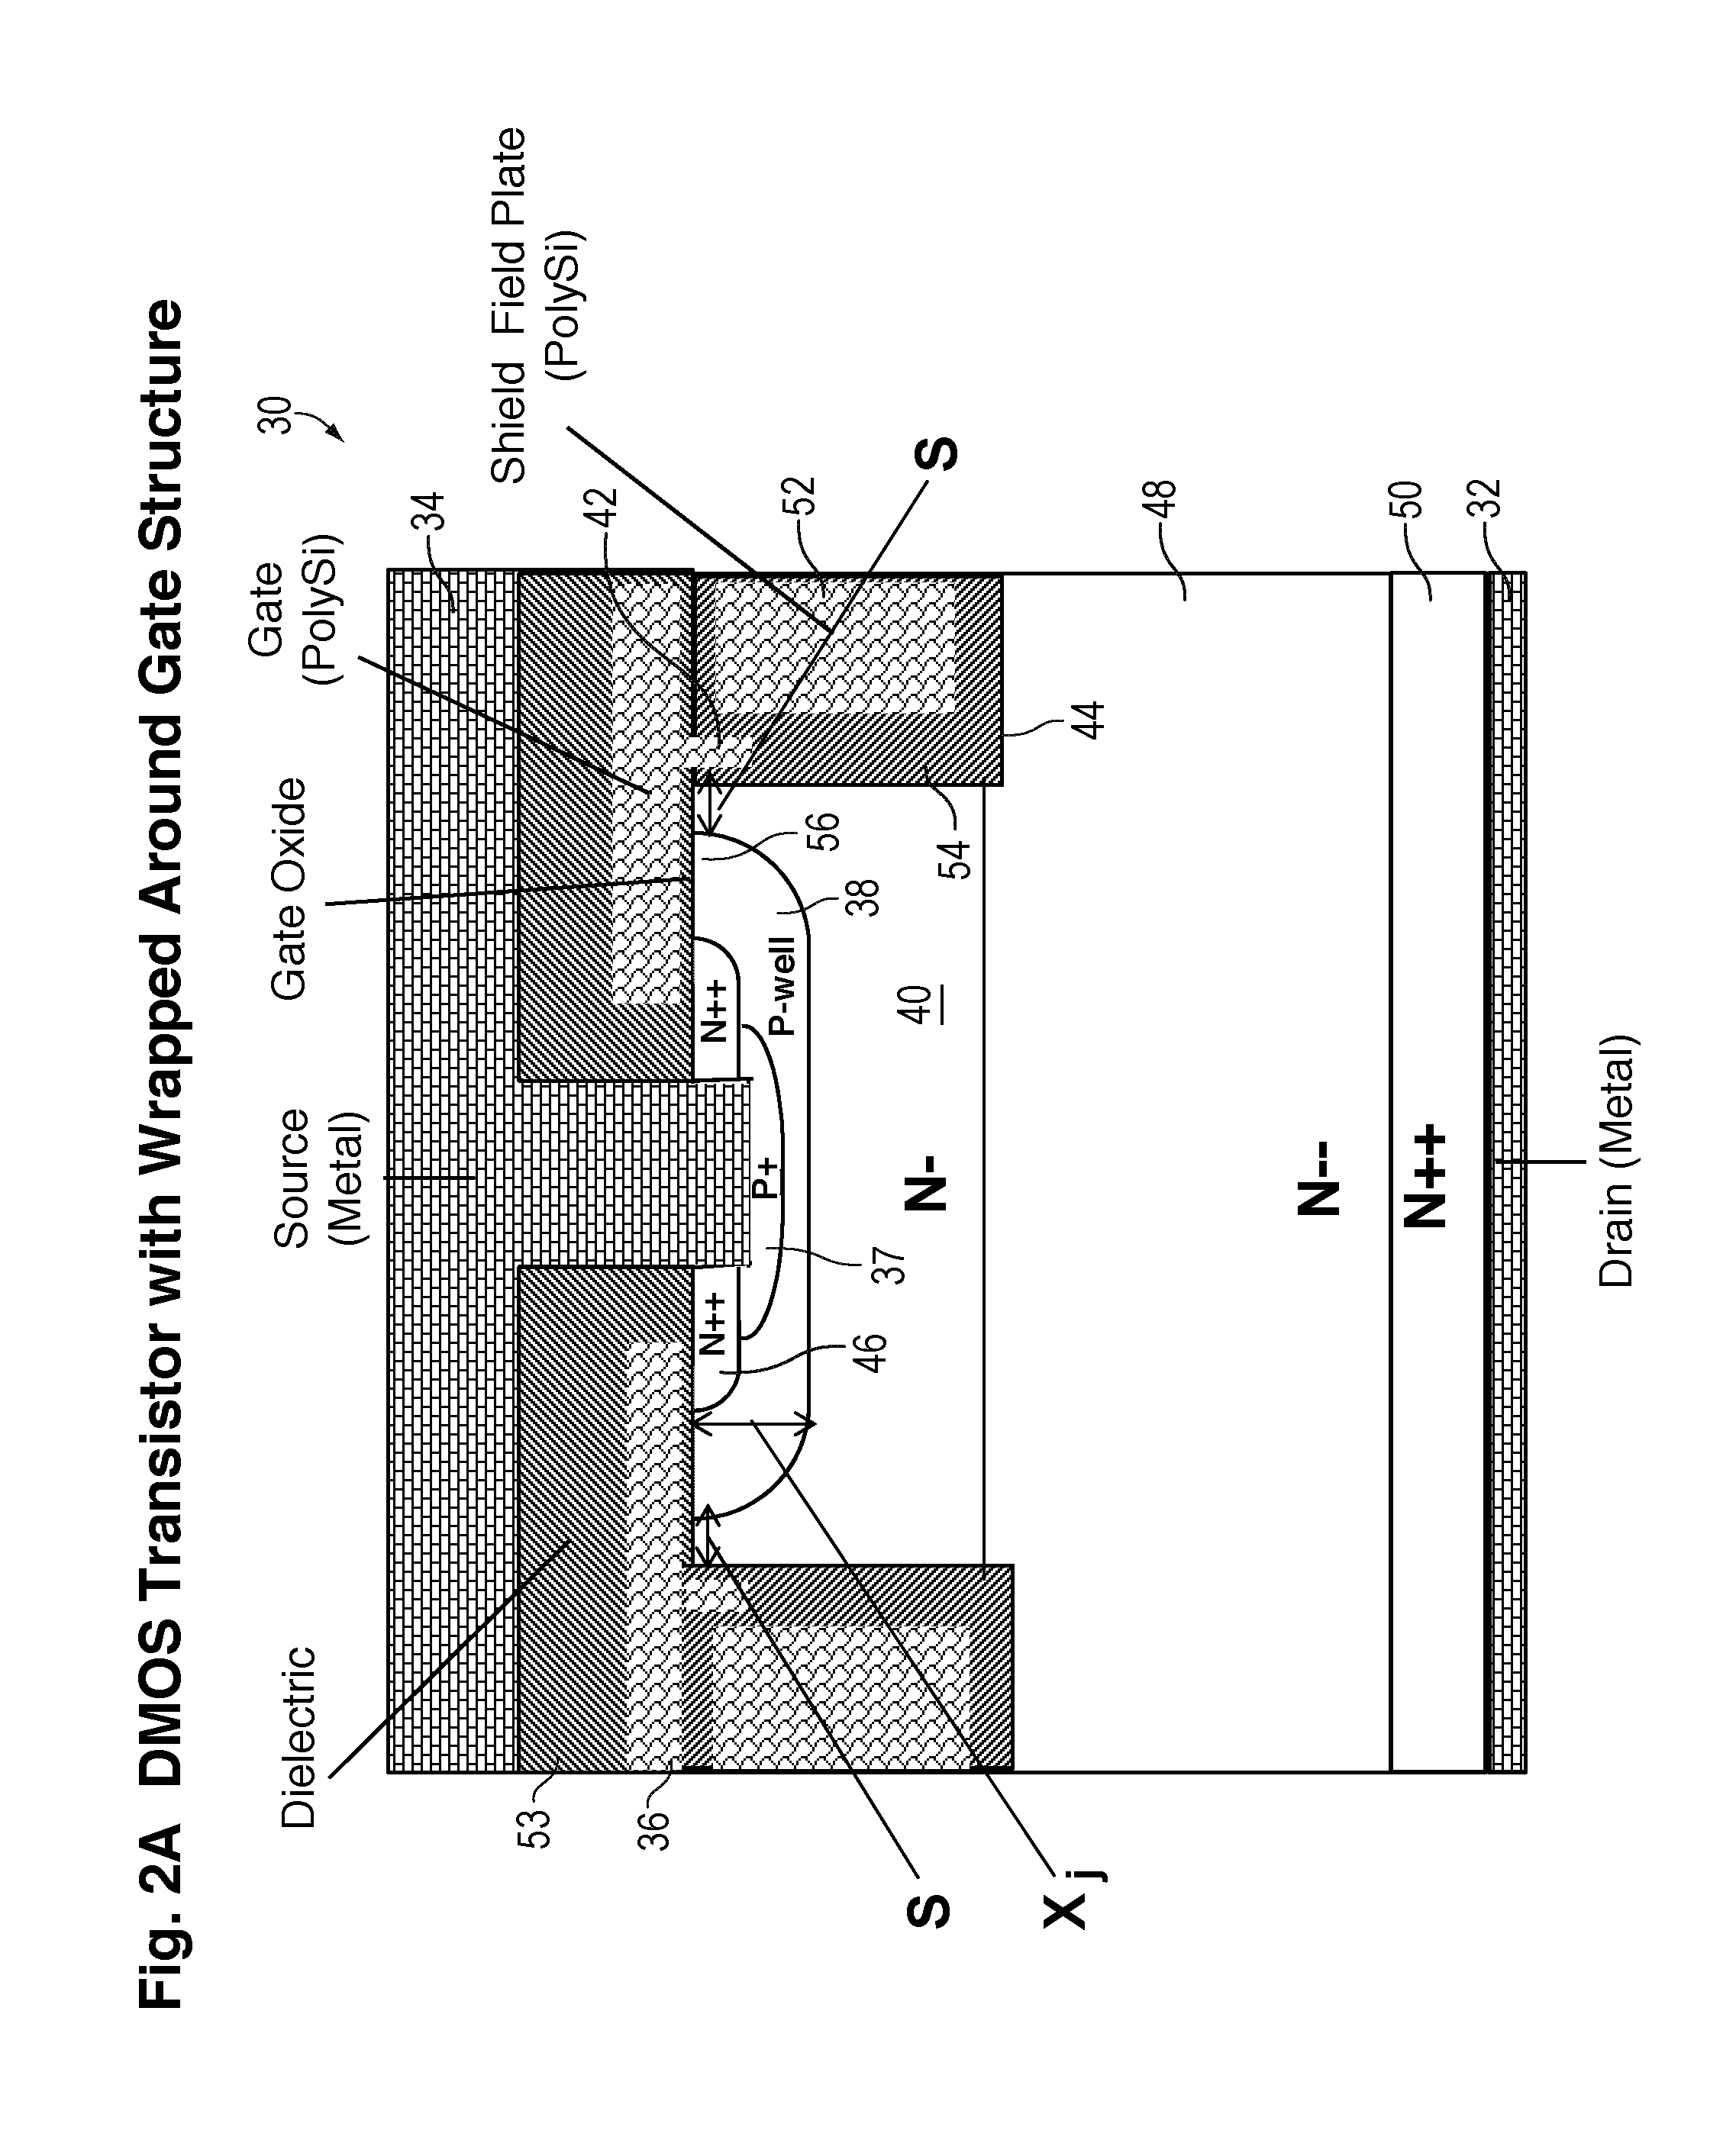 Vertical power MOSFET having planar channel and its method of fabrication